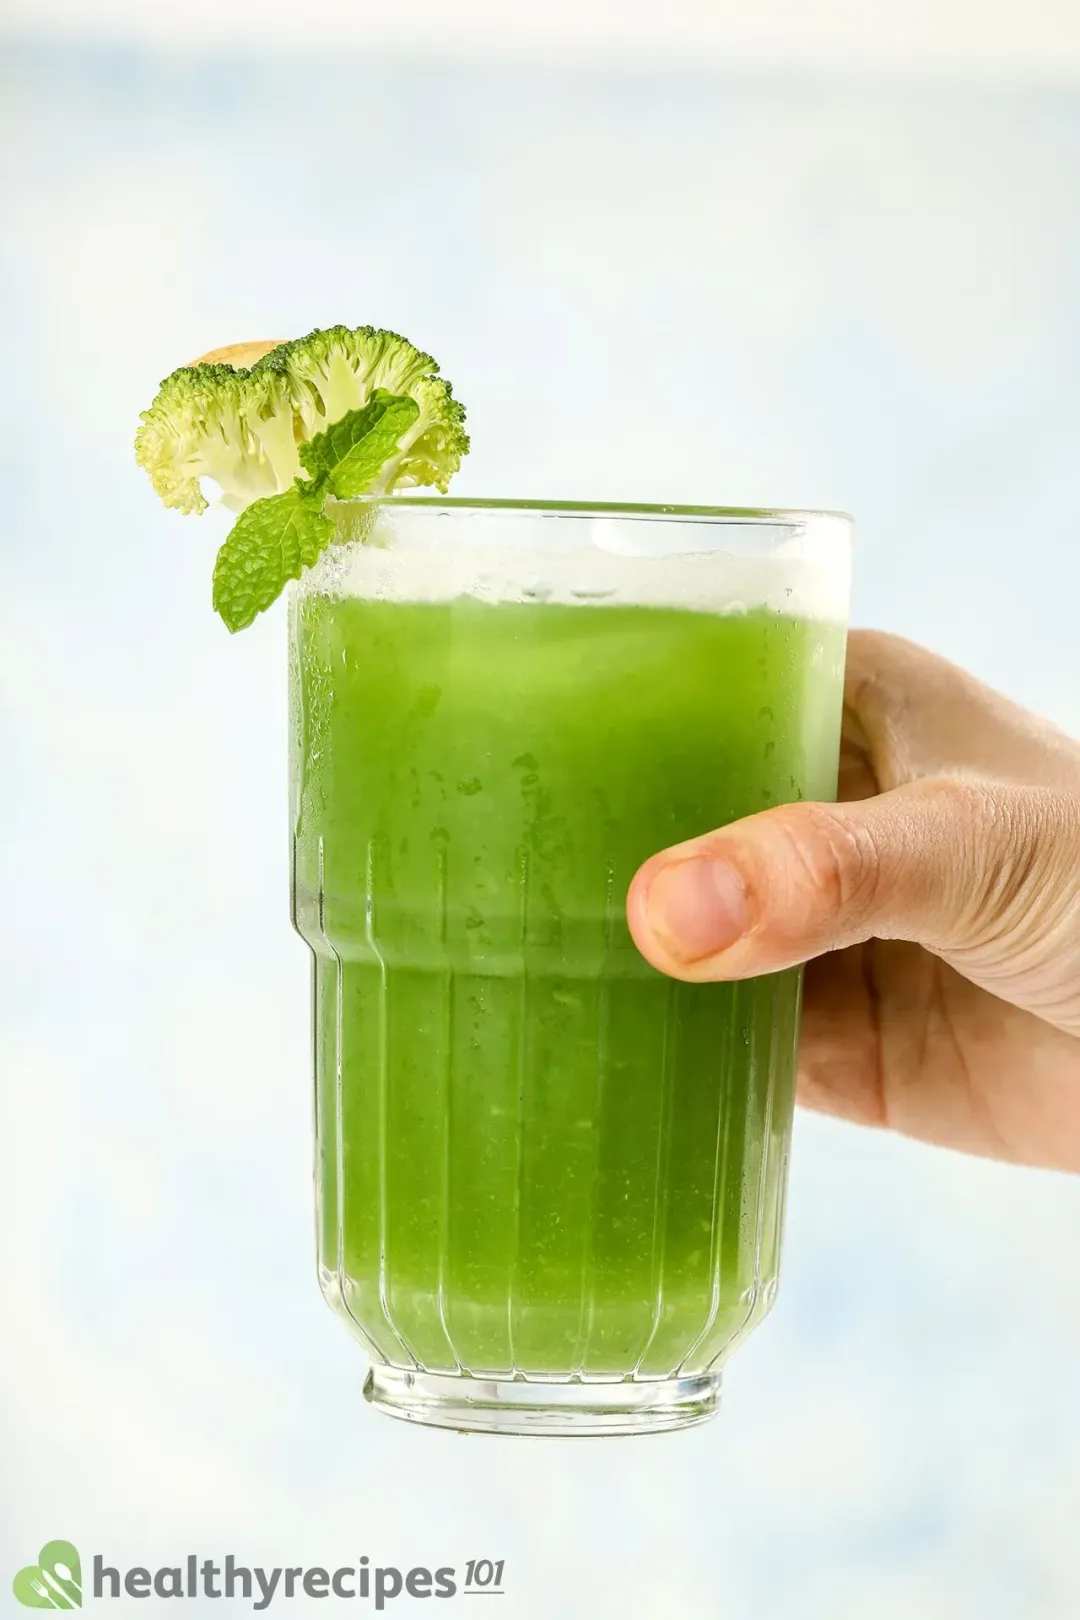 A hand holding a glass of broccoli juice drinks garnished with lime wedges and mints